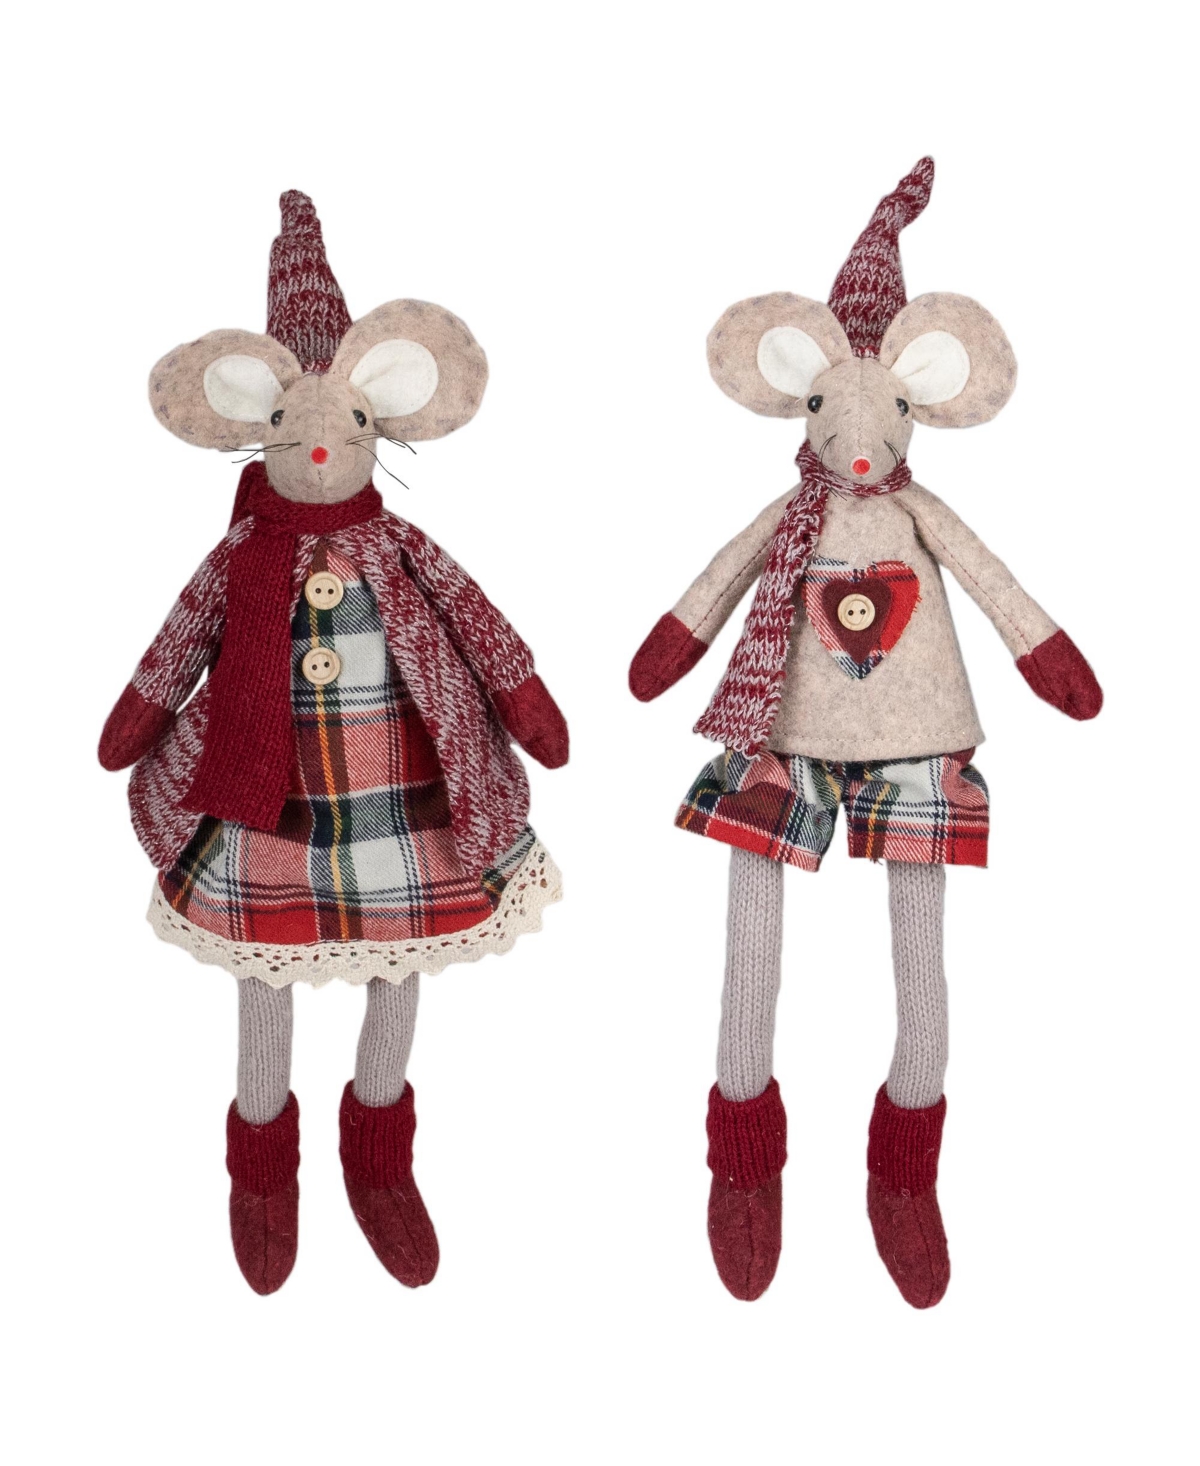 17" Boy and Girl Sitting Plush Christmas Mice Figures, Set of 2 - Red